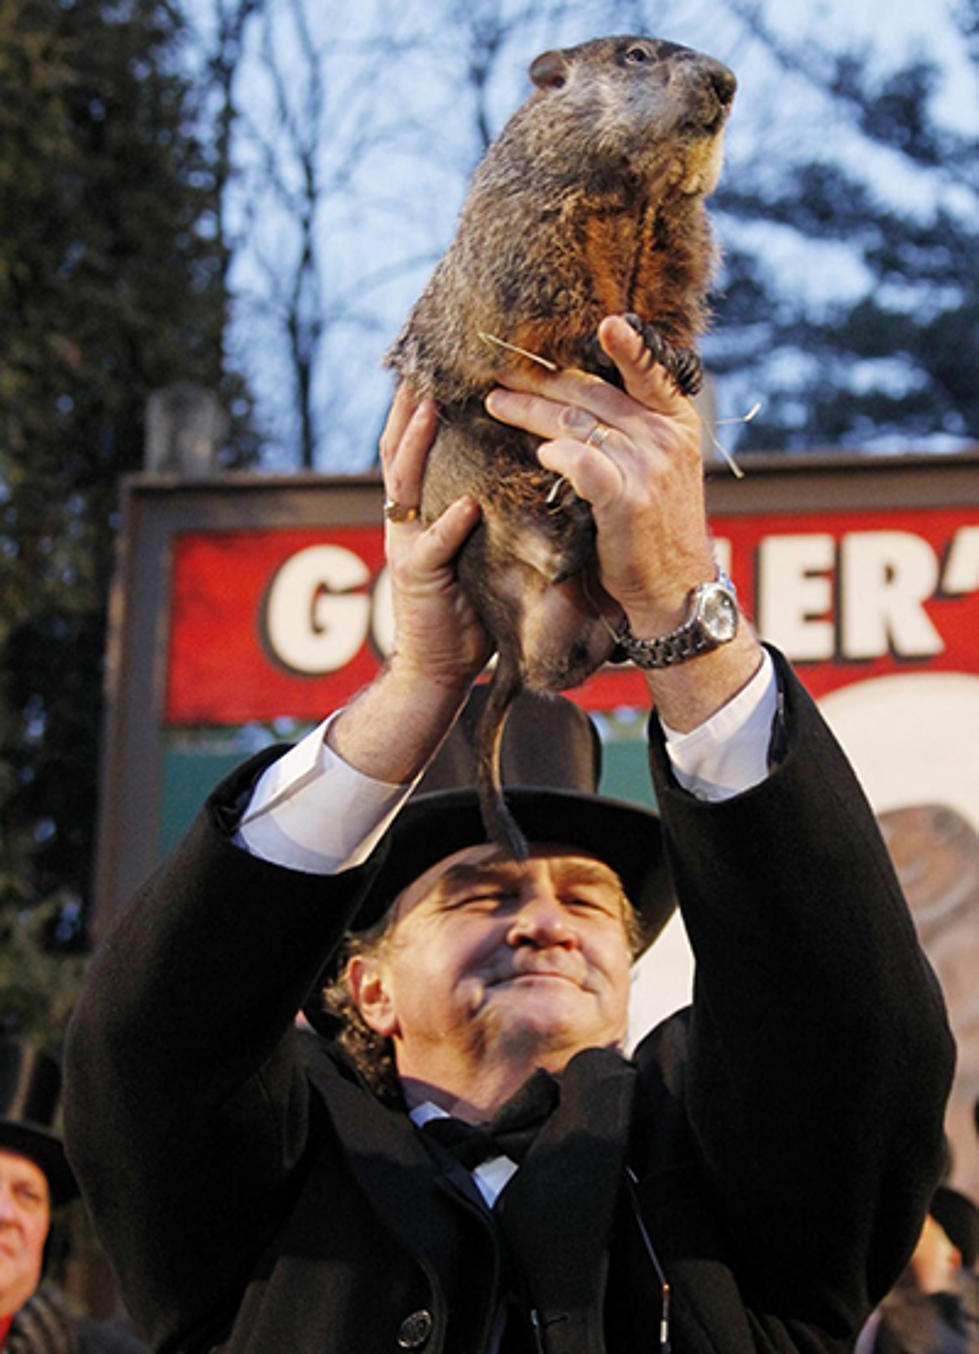 Groundhog Day is Way More Interesting Than You Think